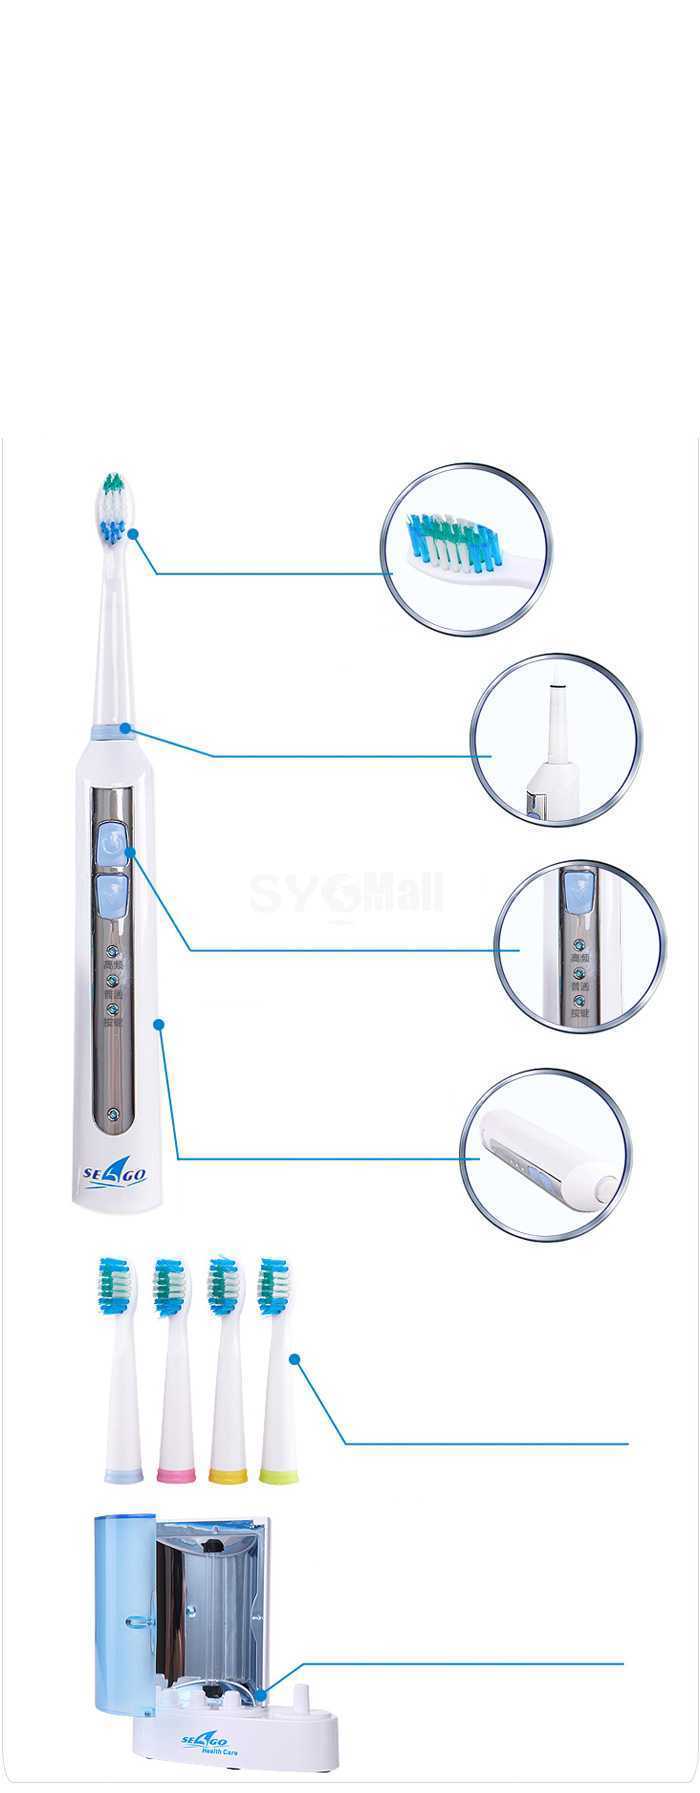 SEAGO Super Useful Whiten Tooth Portable Charging Sonic Electric Toothbrush 